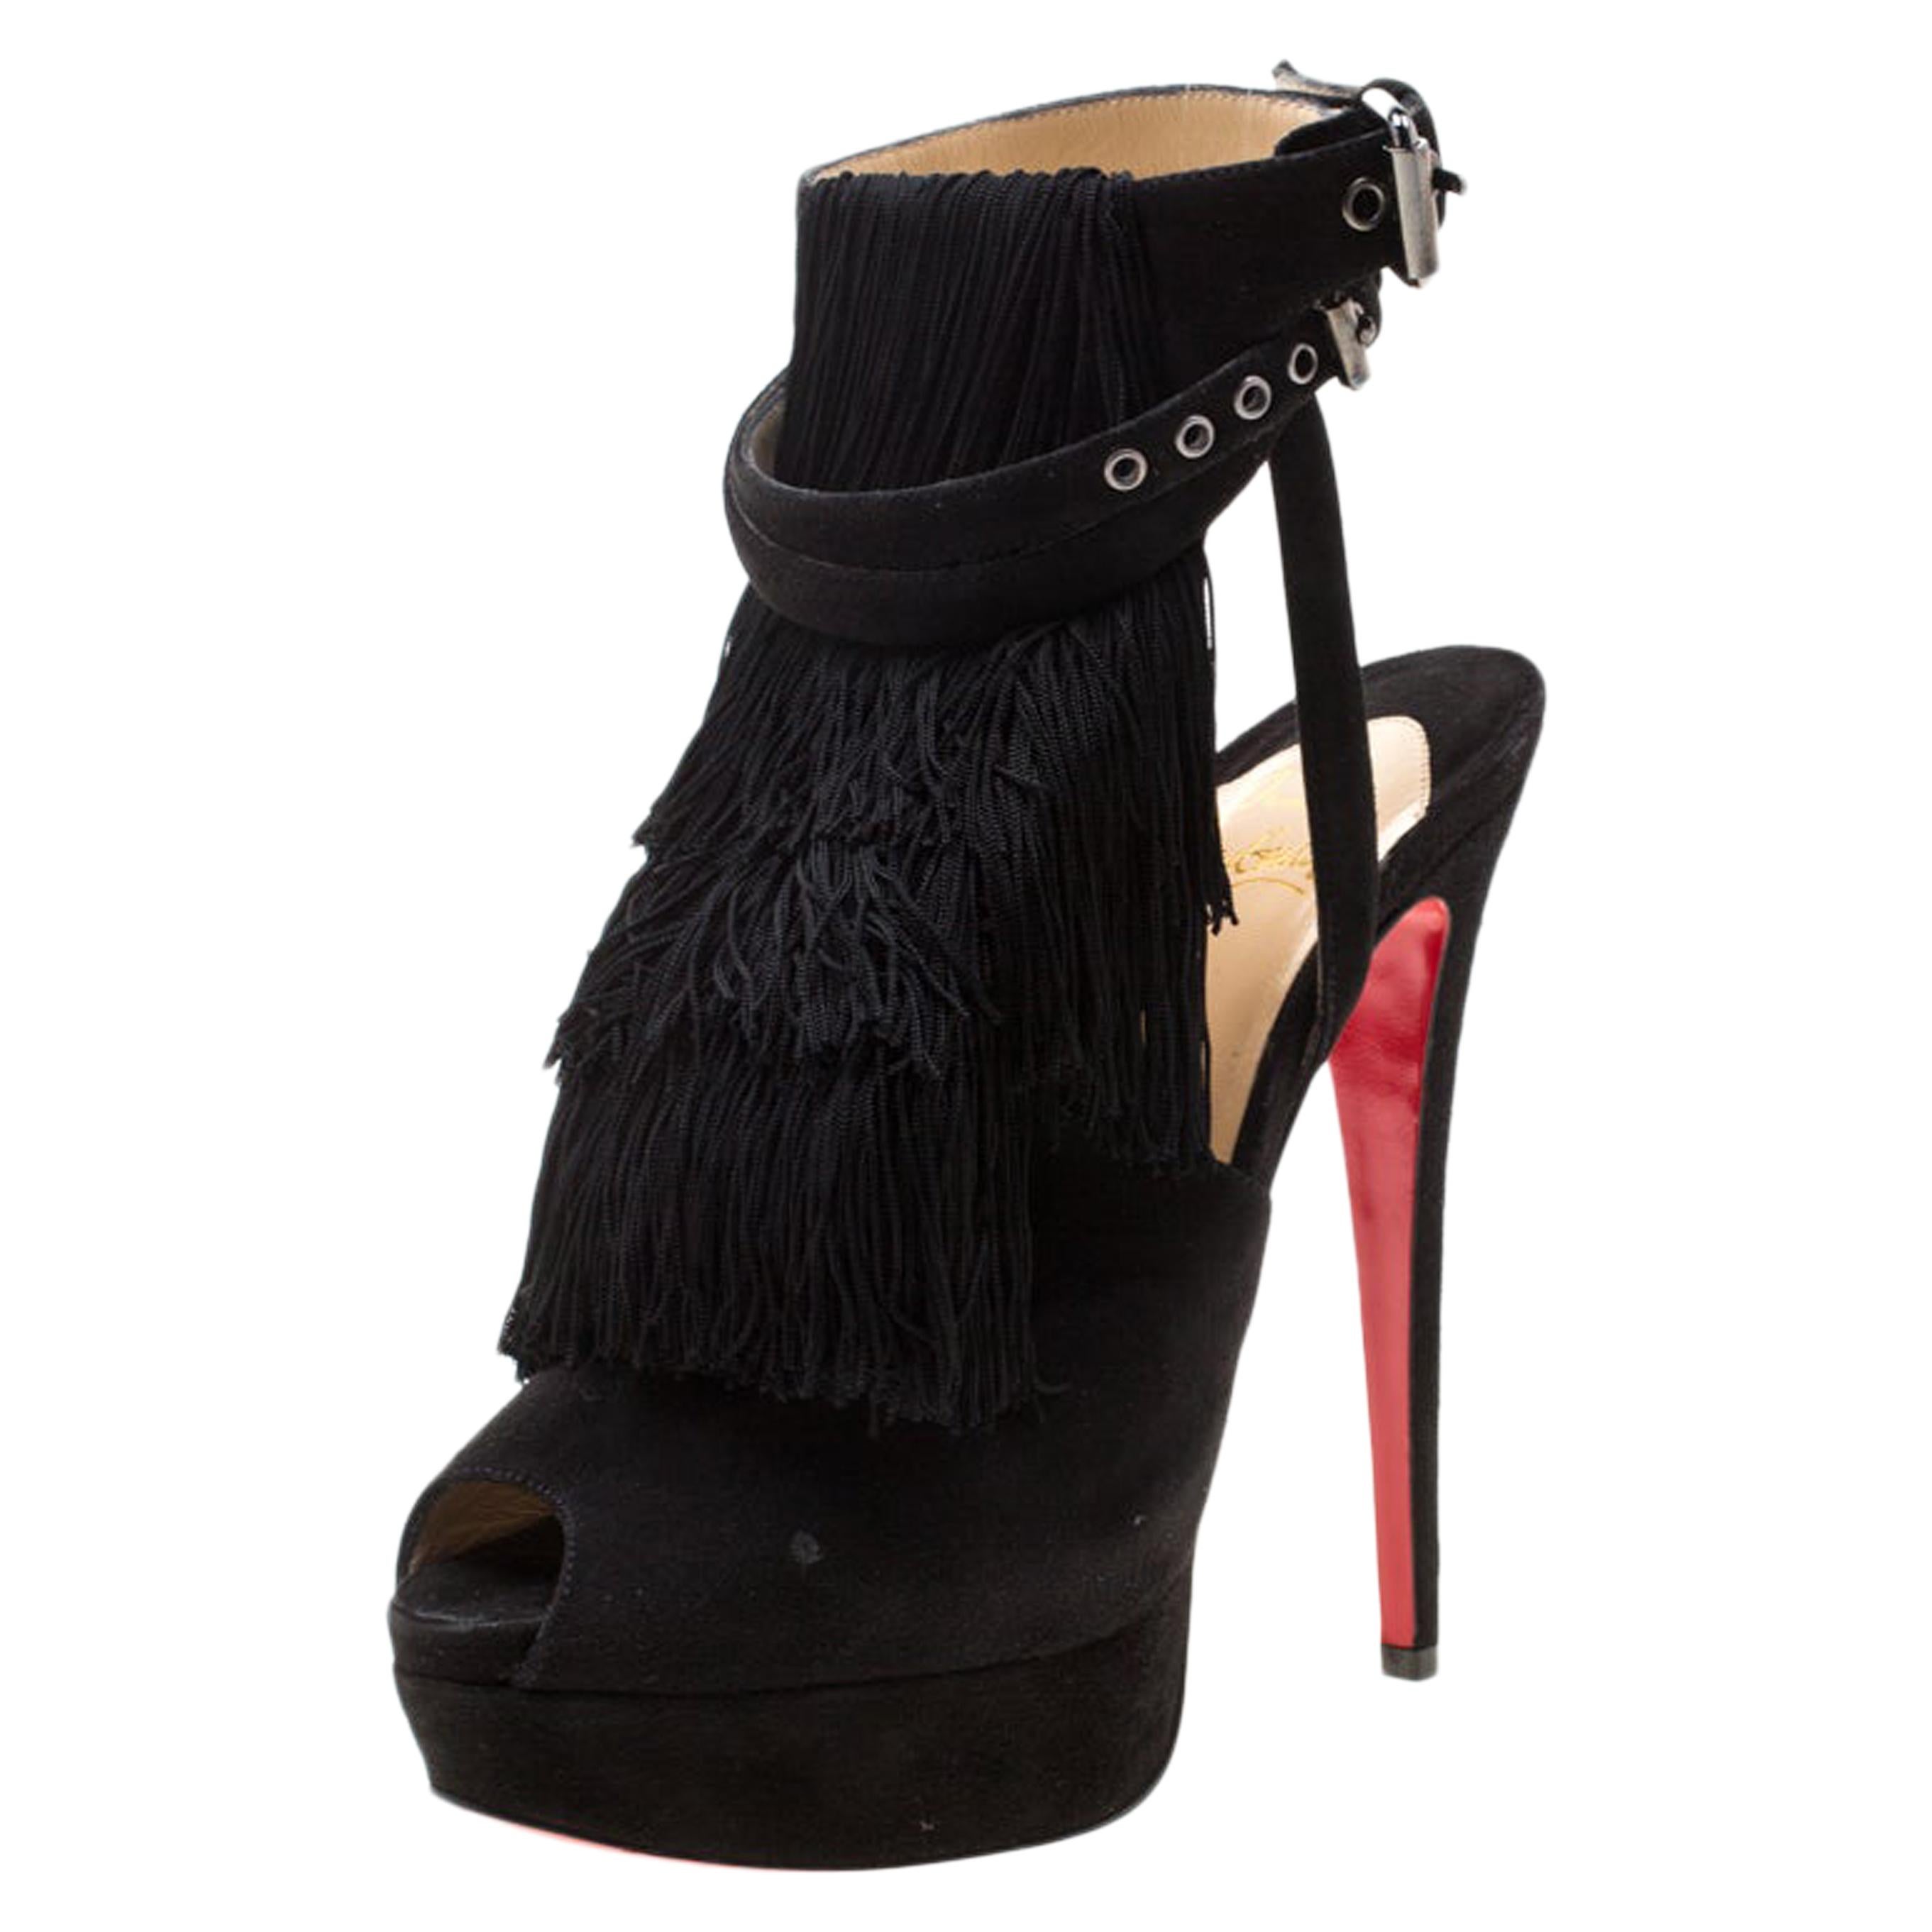 Christian Louboutin Black Suede Change Of The Guard Cross Sandals Size 37.5